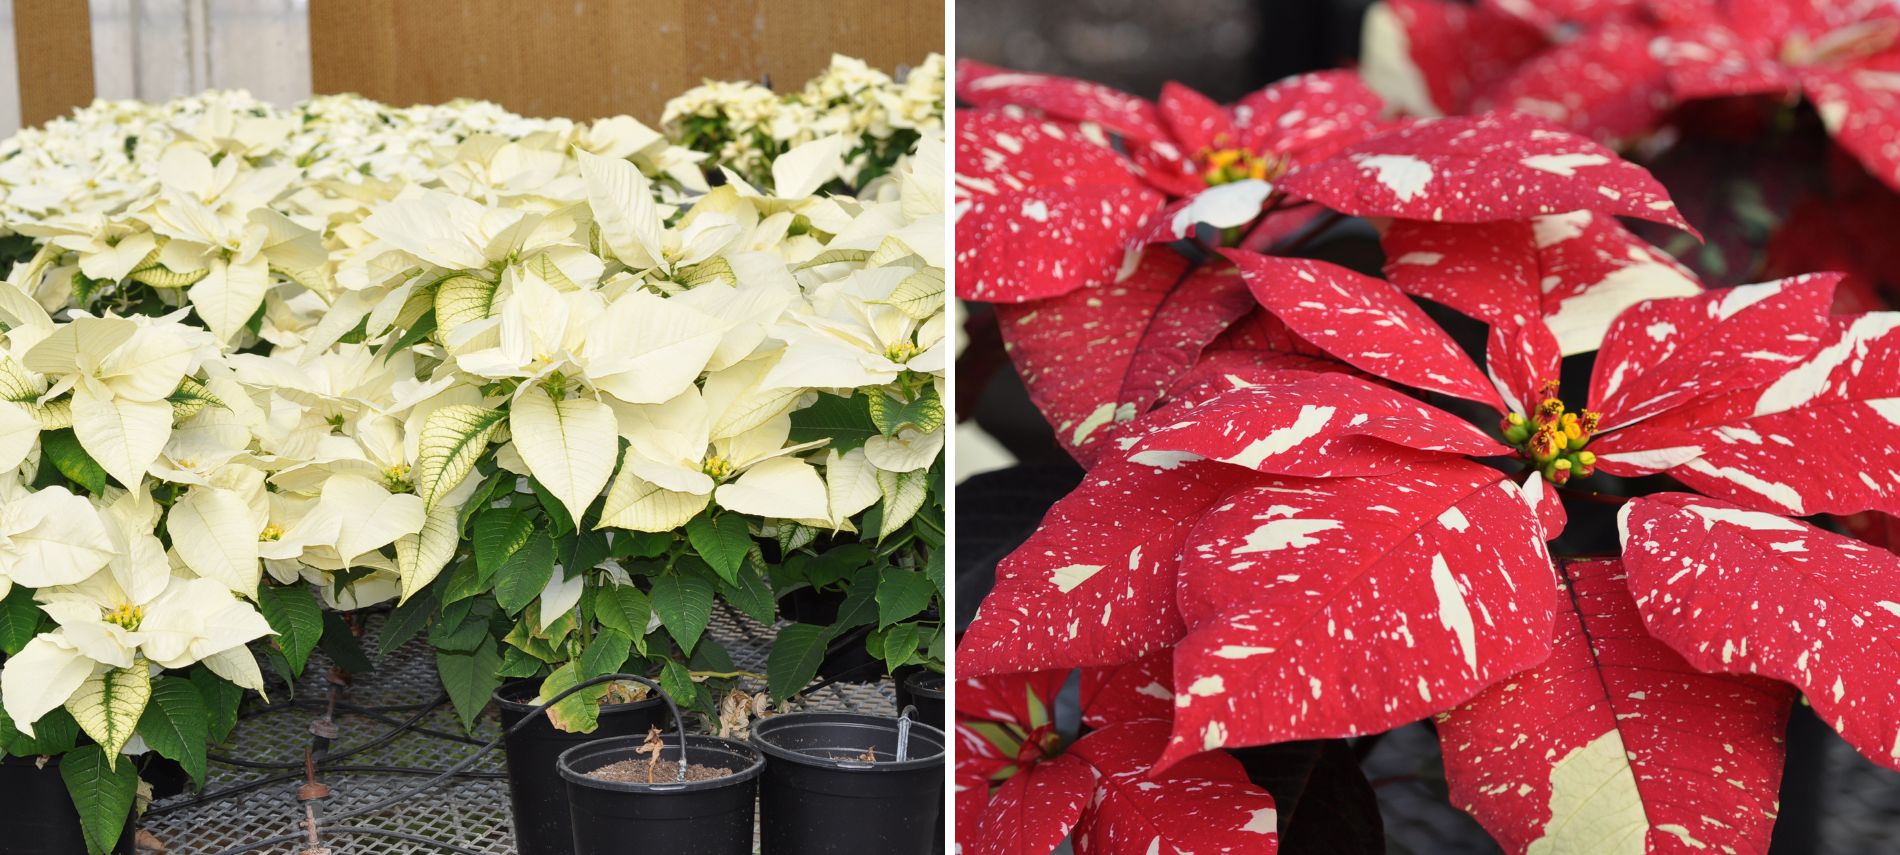 two photos of local poinsettias, the ones on the left white, the ones on the right red with white speckles.